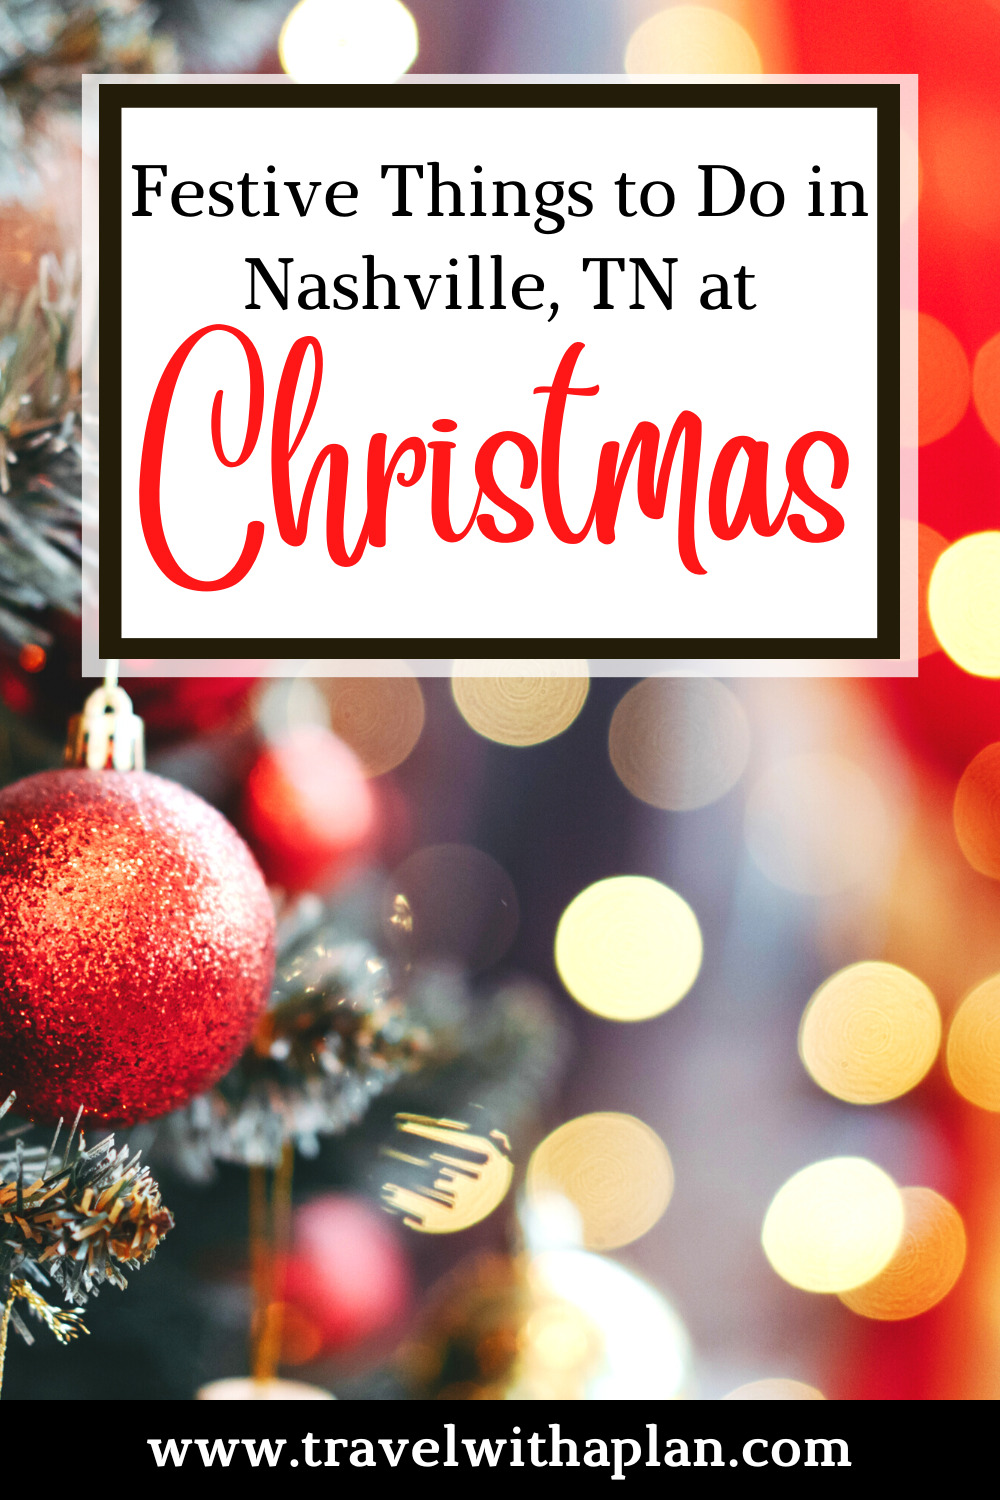 Planning a trip to Nashville in winter?  Check out our awesome list of things to do in Nashville at Christmas time!  These Christmas events in Nashville are sure to provide holiday fun for everyone in the family!  #ChristmasinNashville #NashvilleChristmasactivities #NashvilleTN